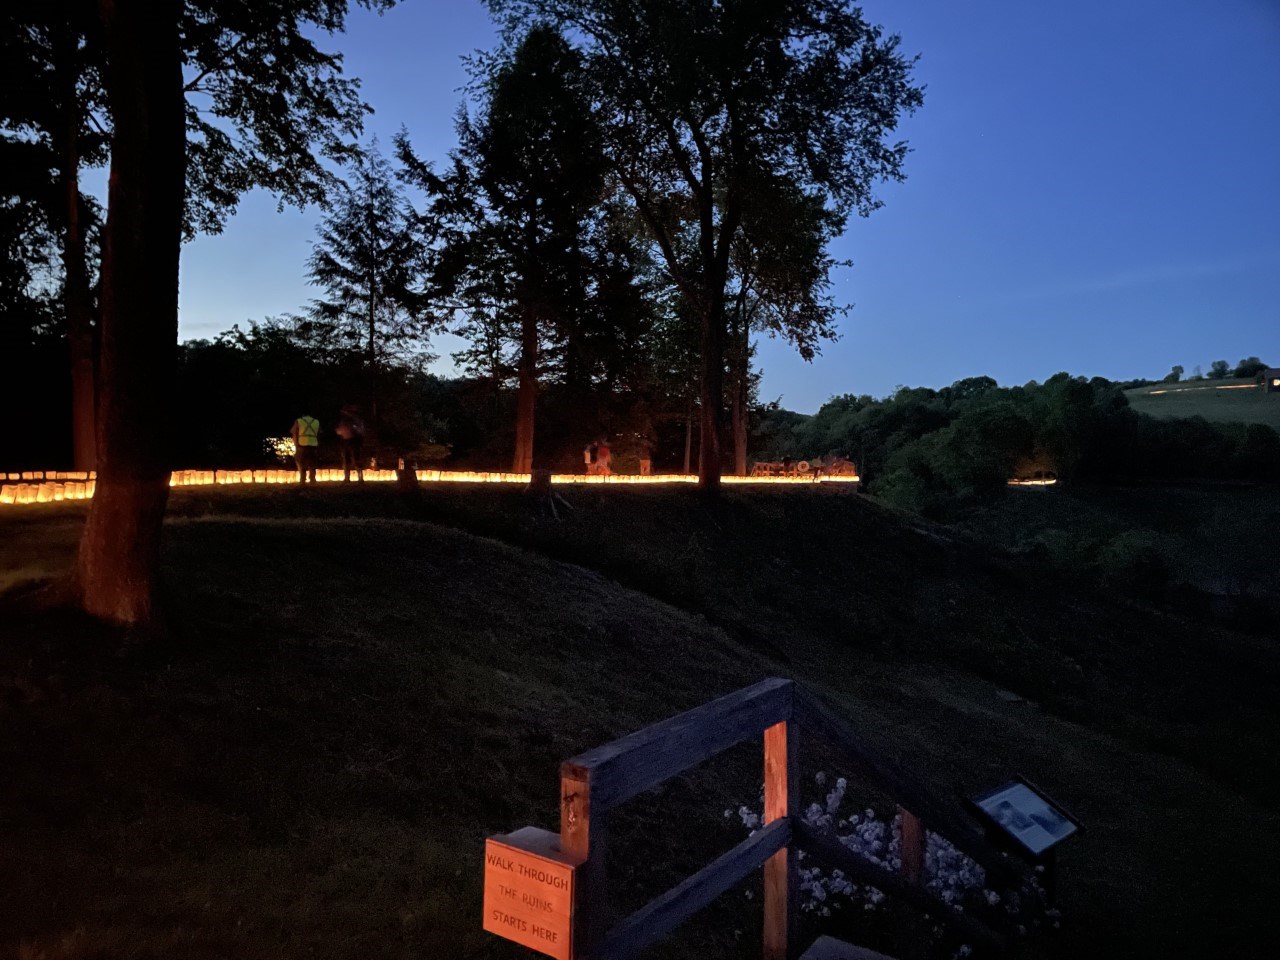 Remains of the dam with luminaries